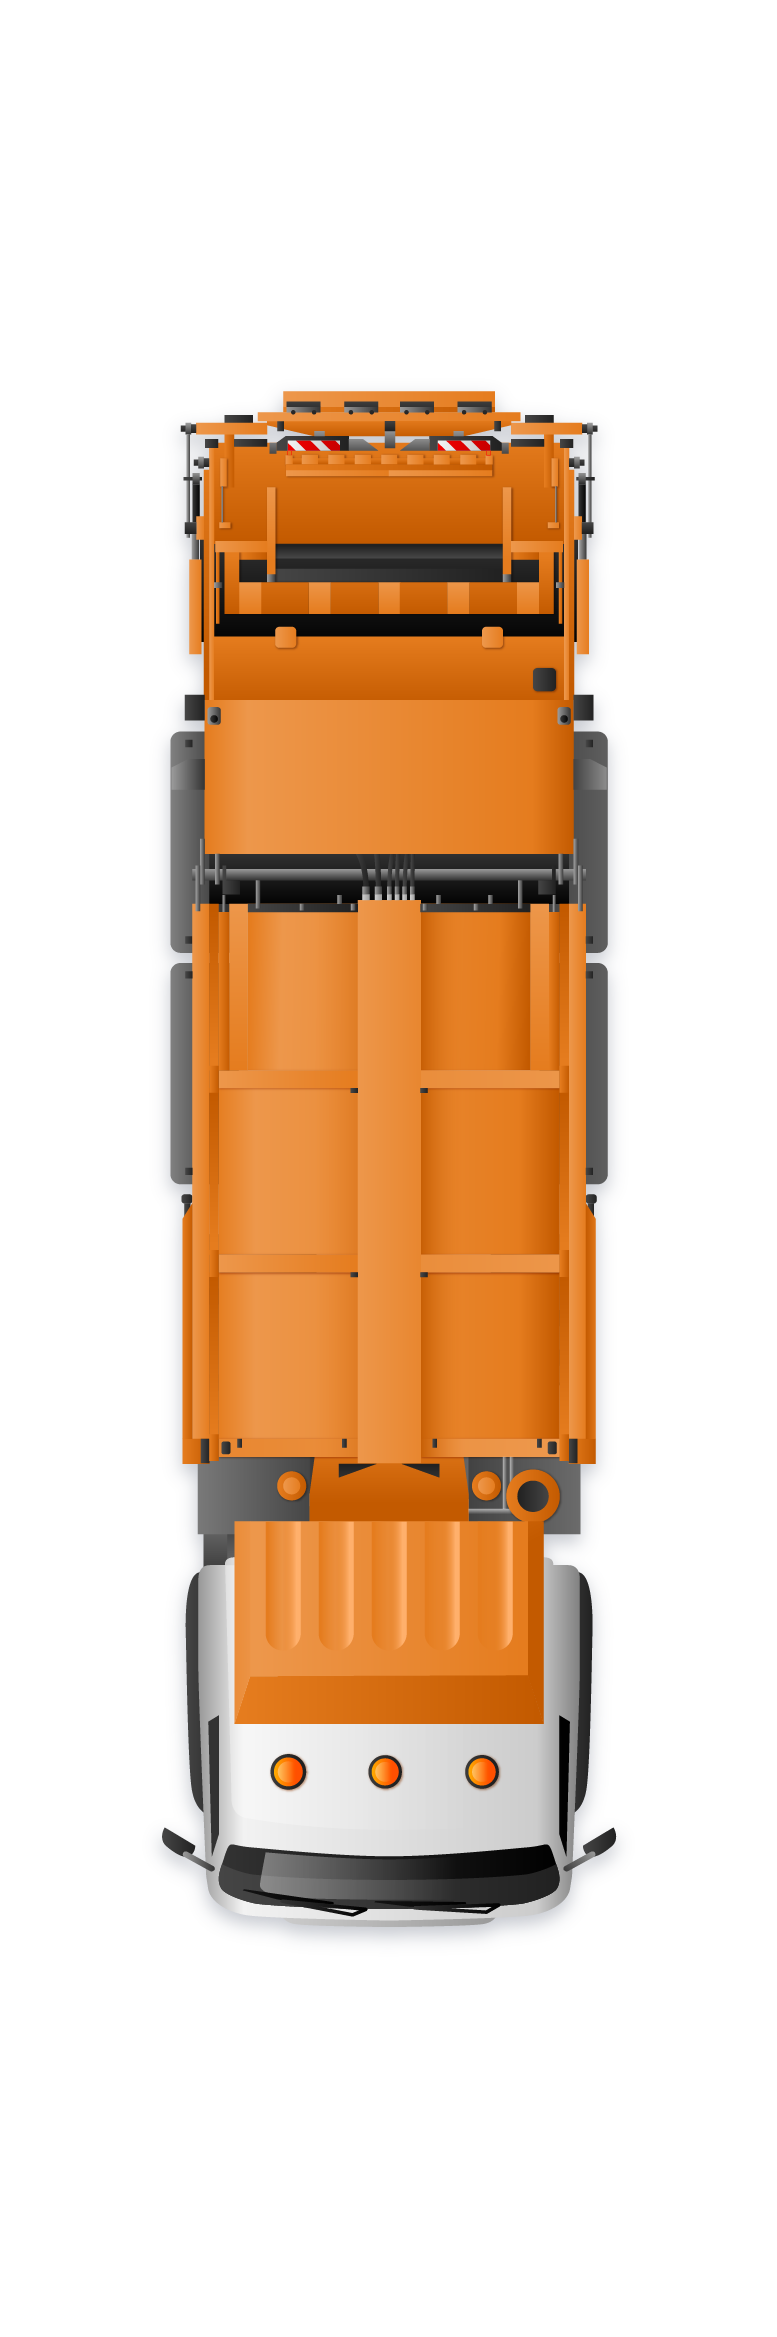 Waste collection vehicle